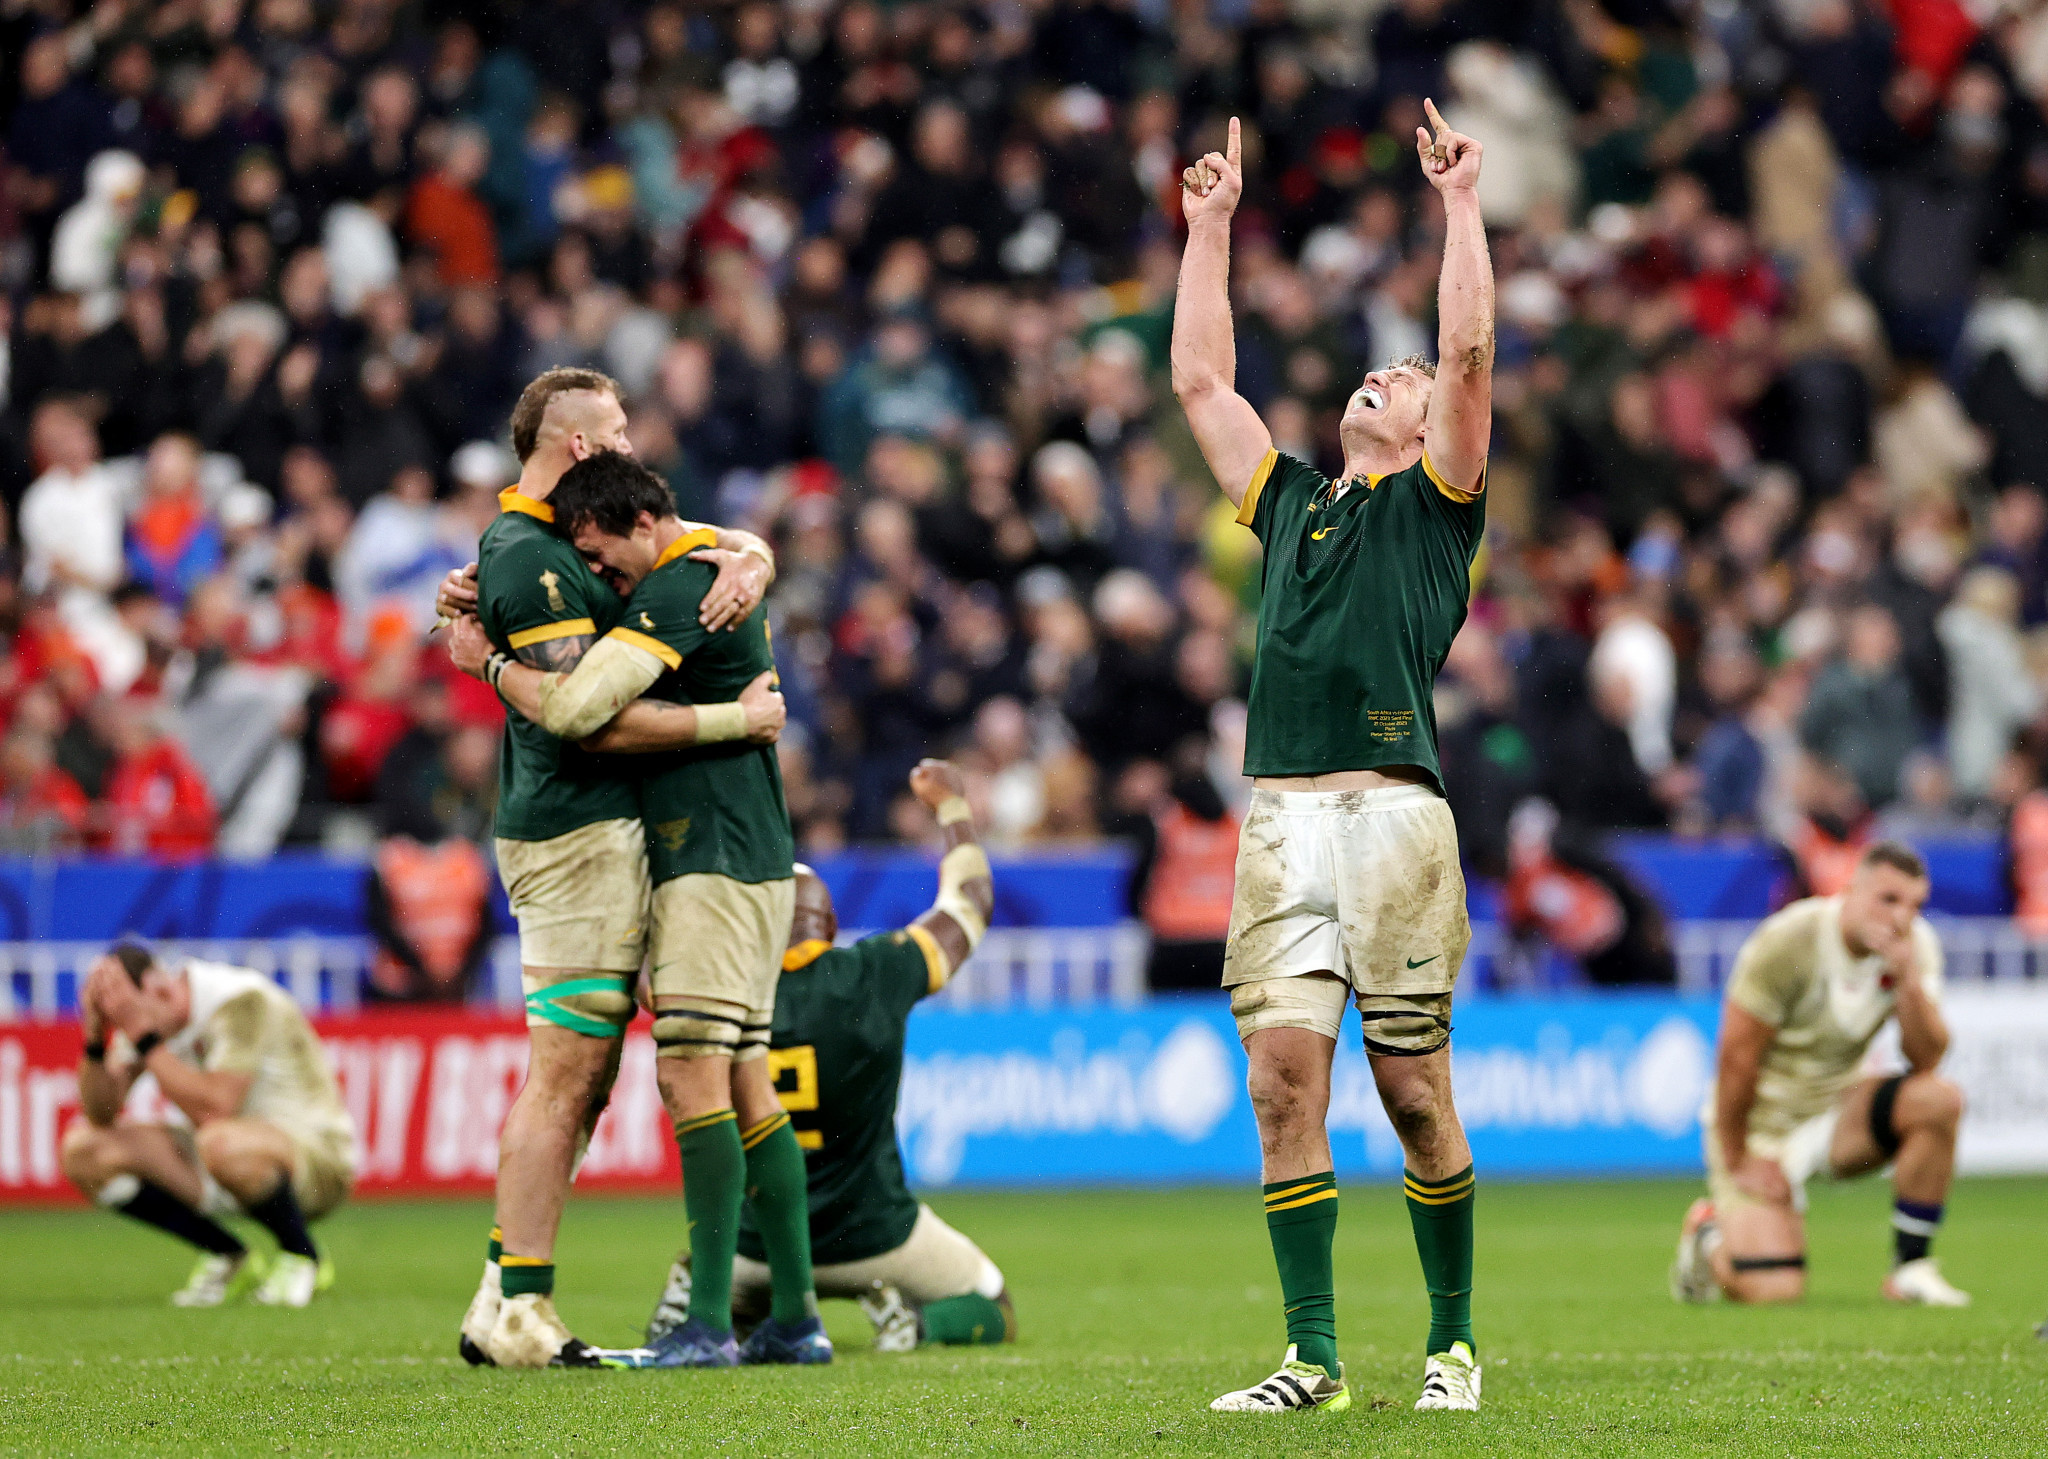 New Zealand and South Africa to battle it out for Rugby World Cup